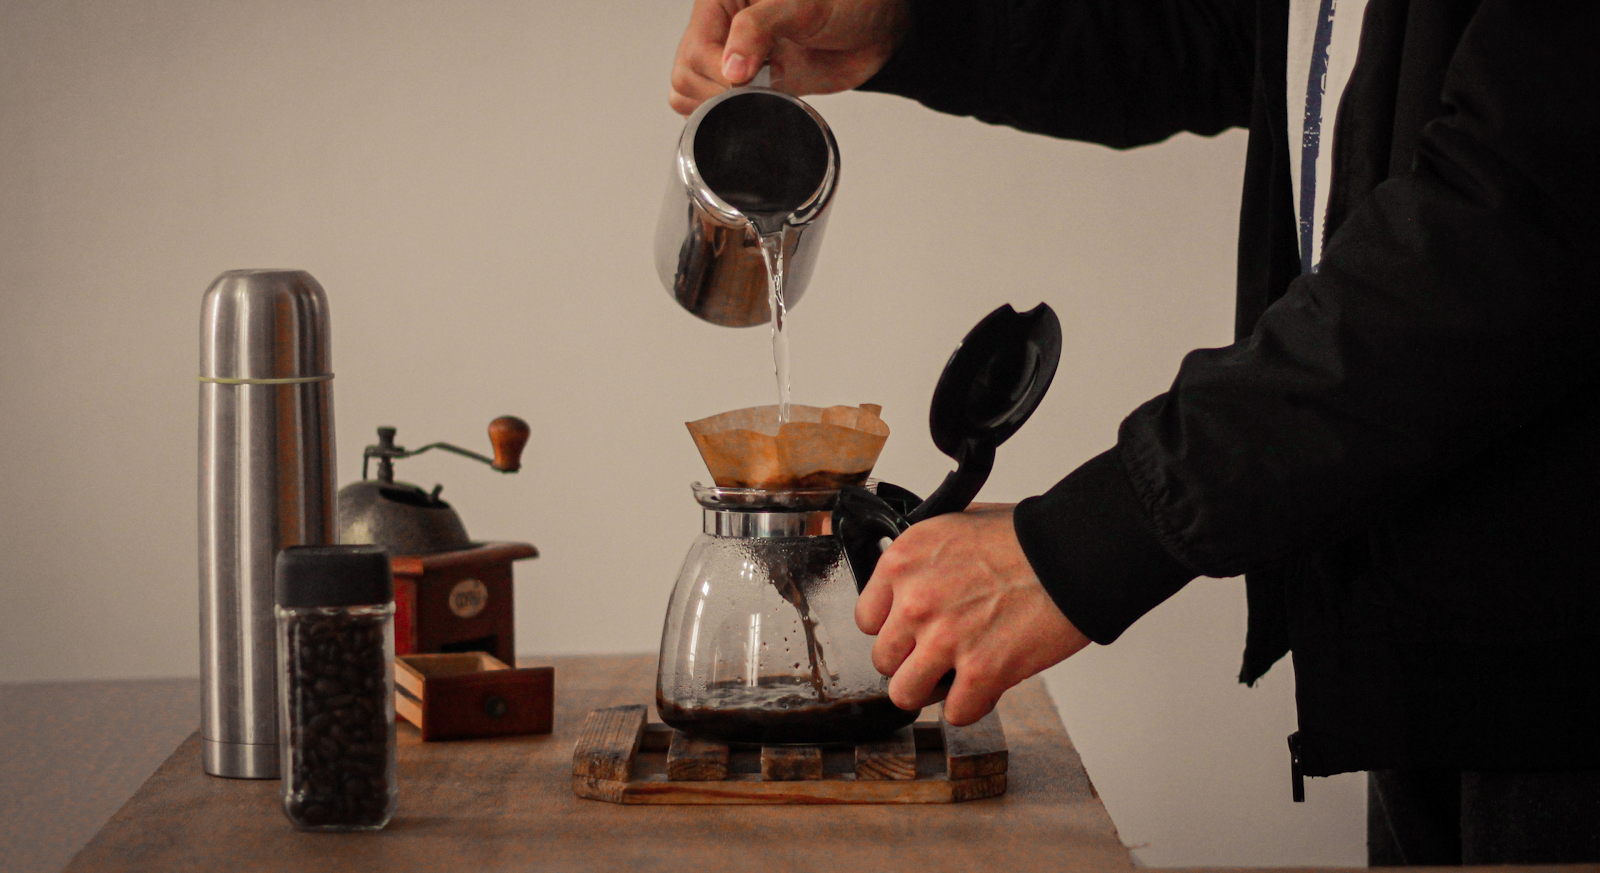 at-home barista crafting his brew